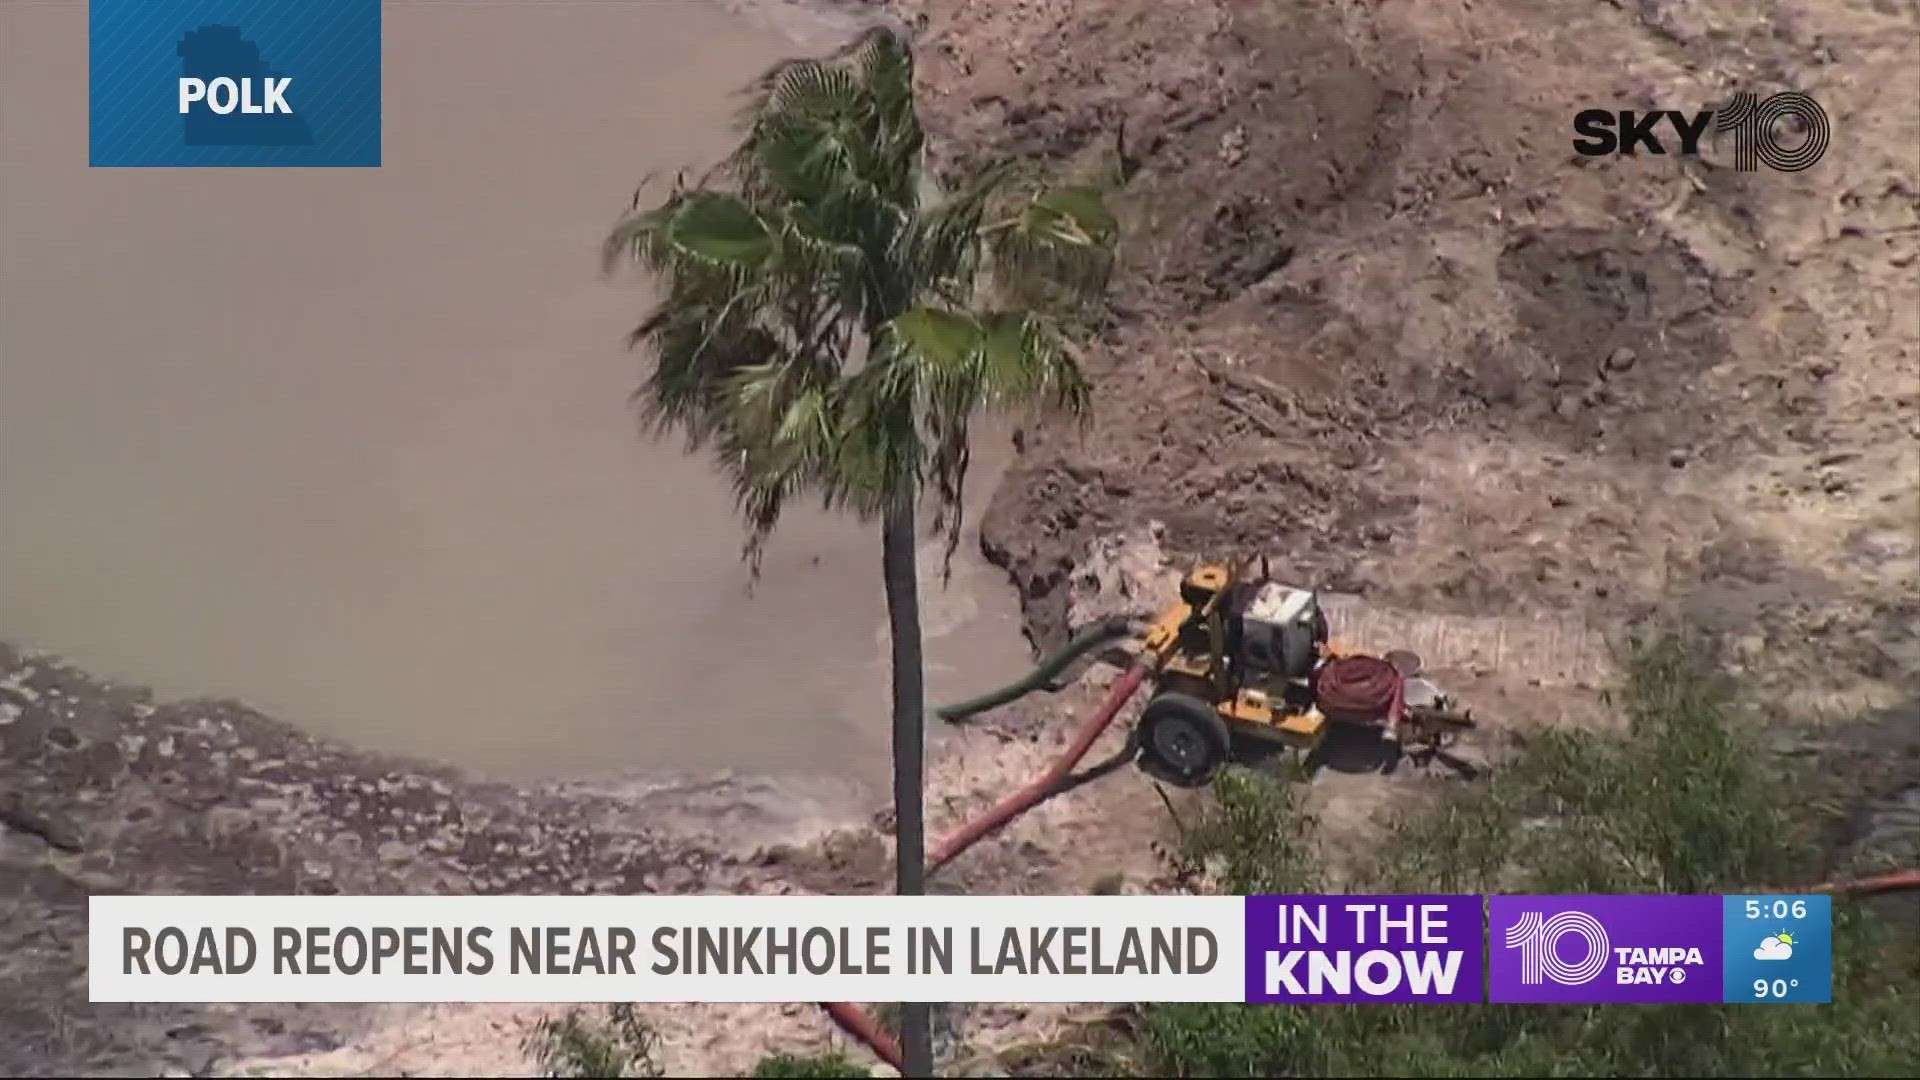 Polk County officials narrowed down what seems to be the cause behind the sinkhole — drilling.